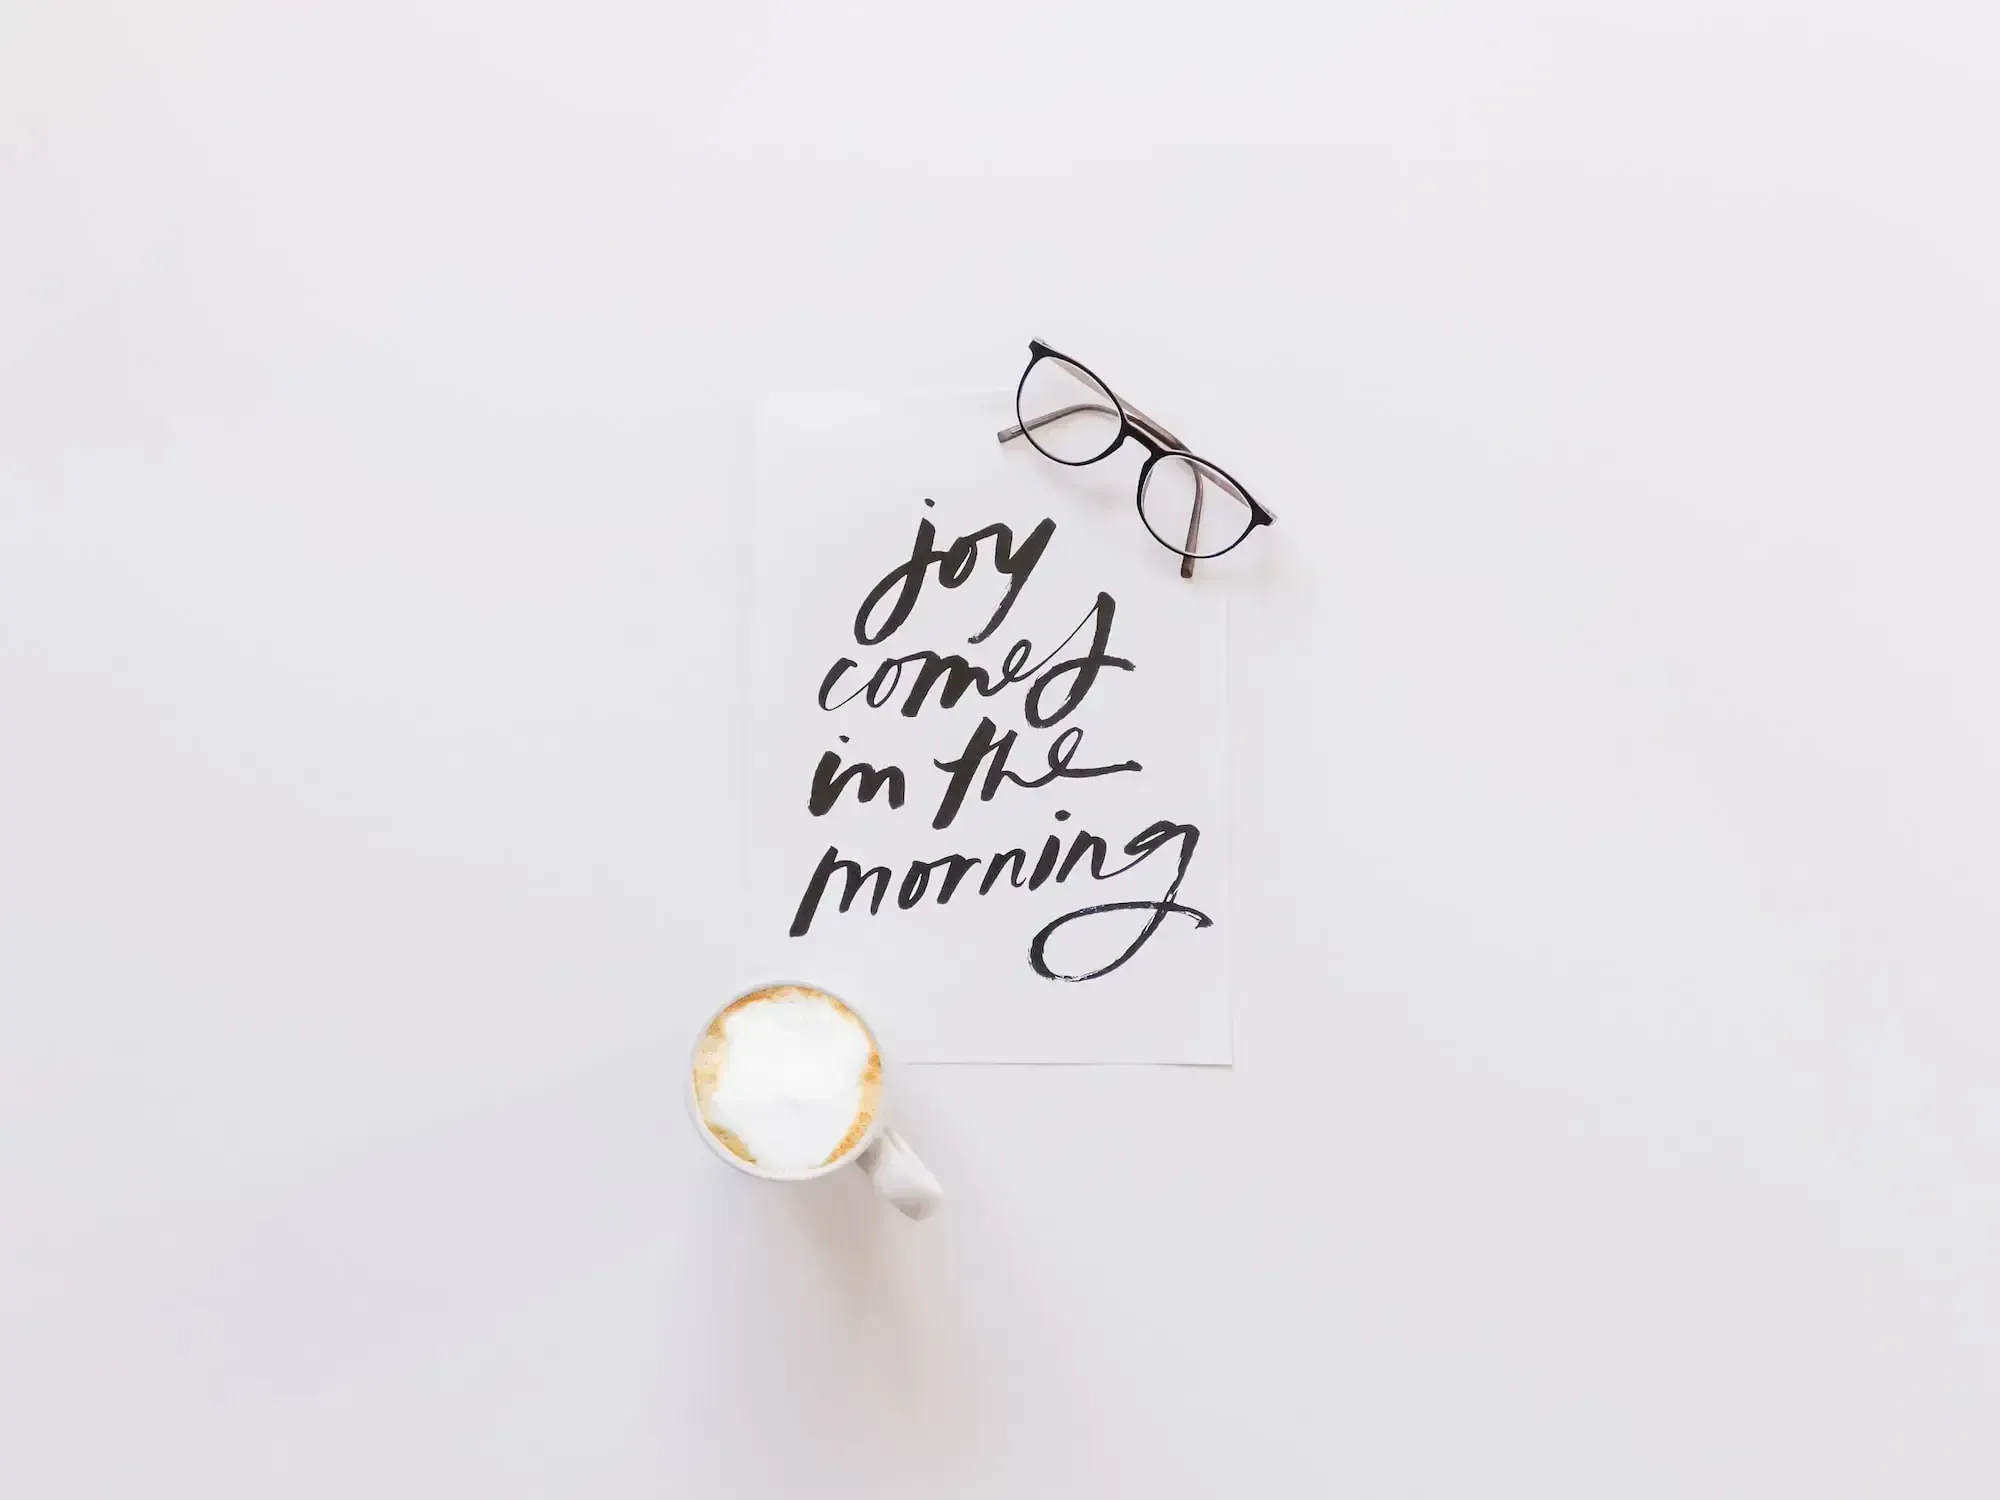 "joy comes in the morning" on a sheet of paper, glasses and a cup of cappuccino next to it.